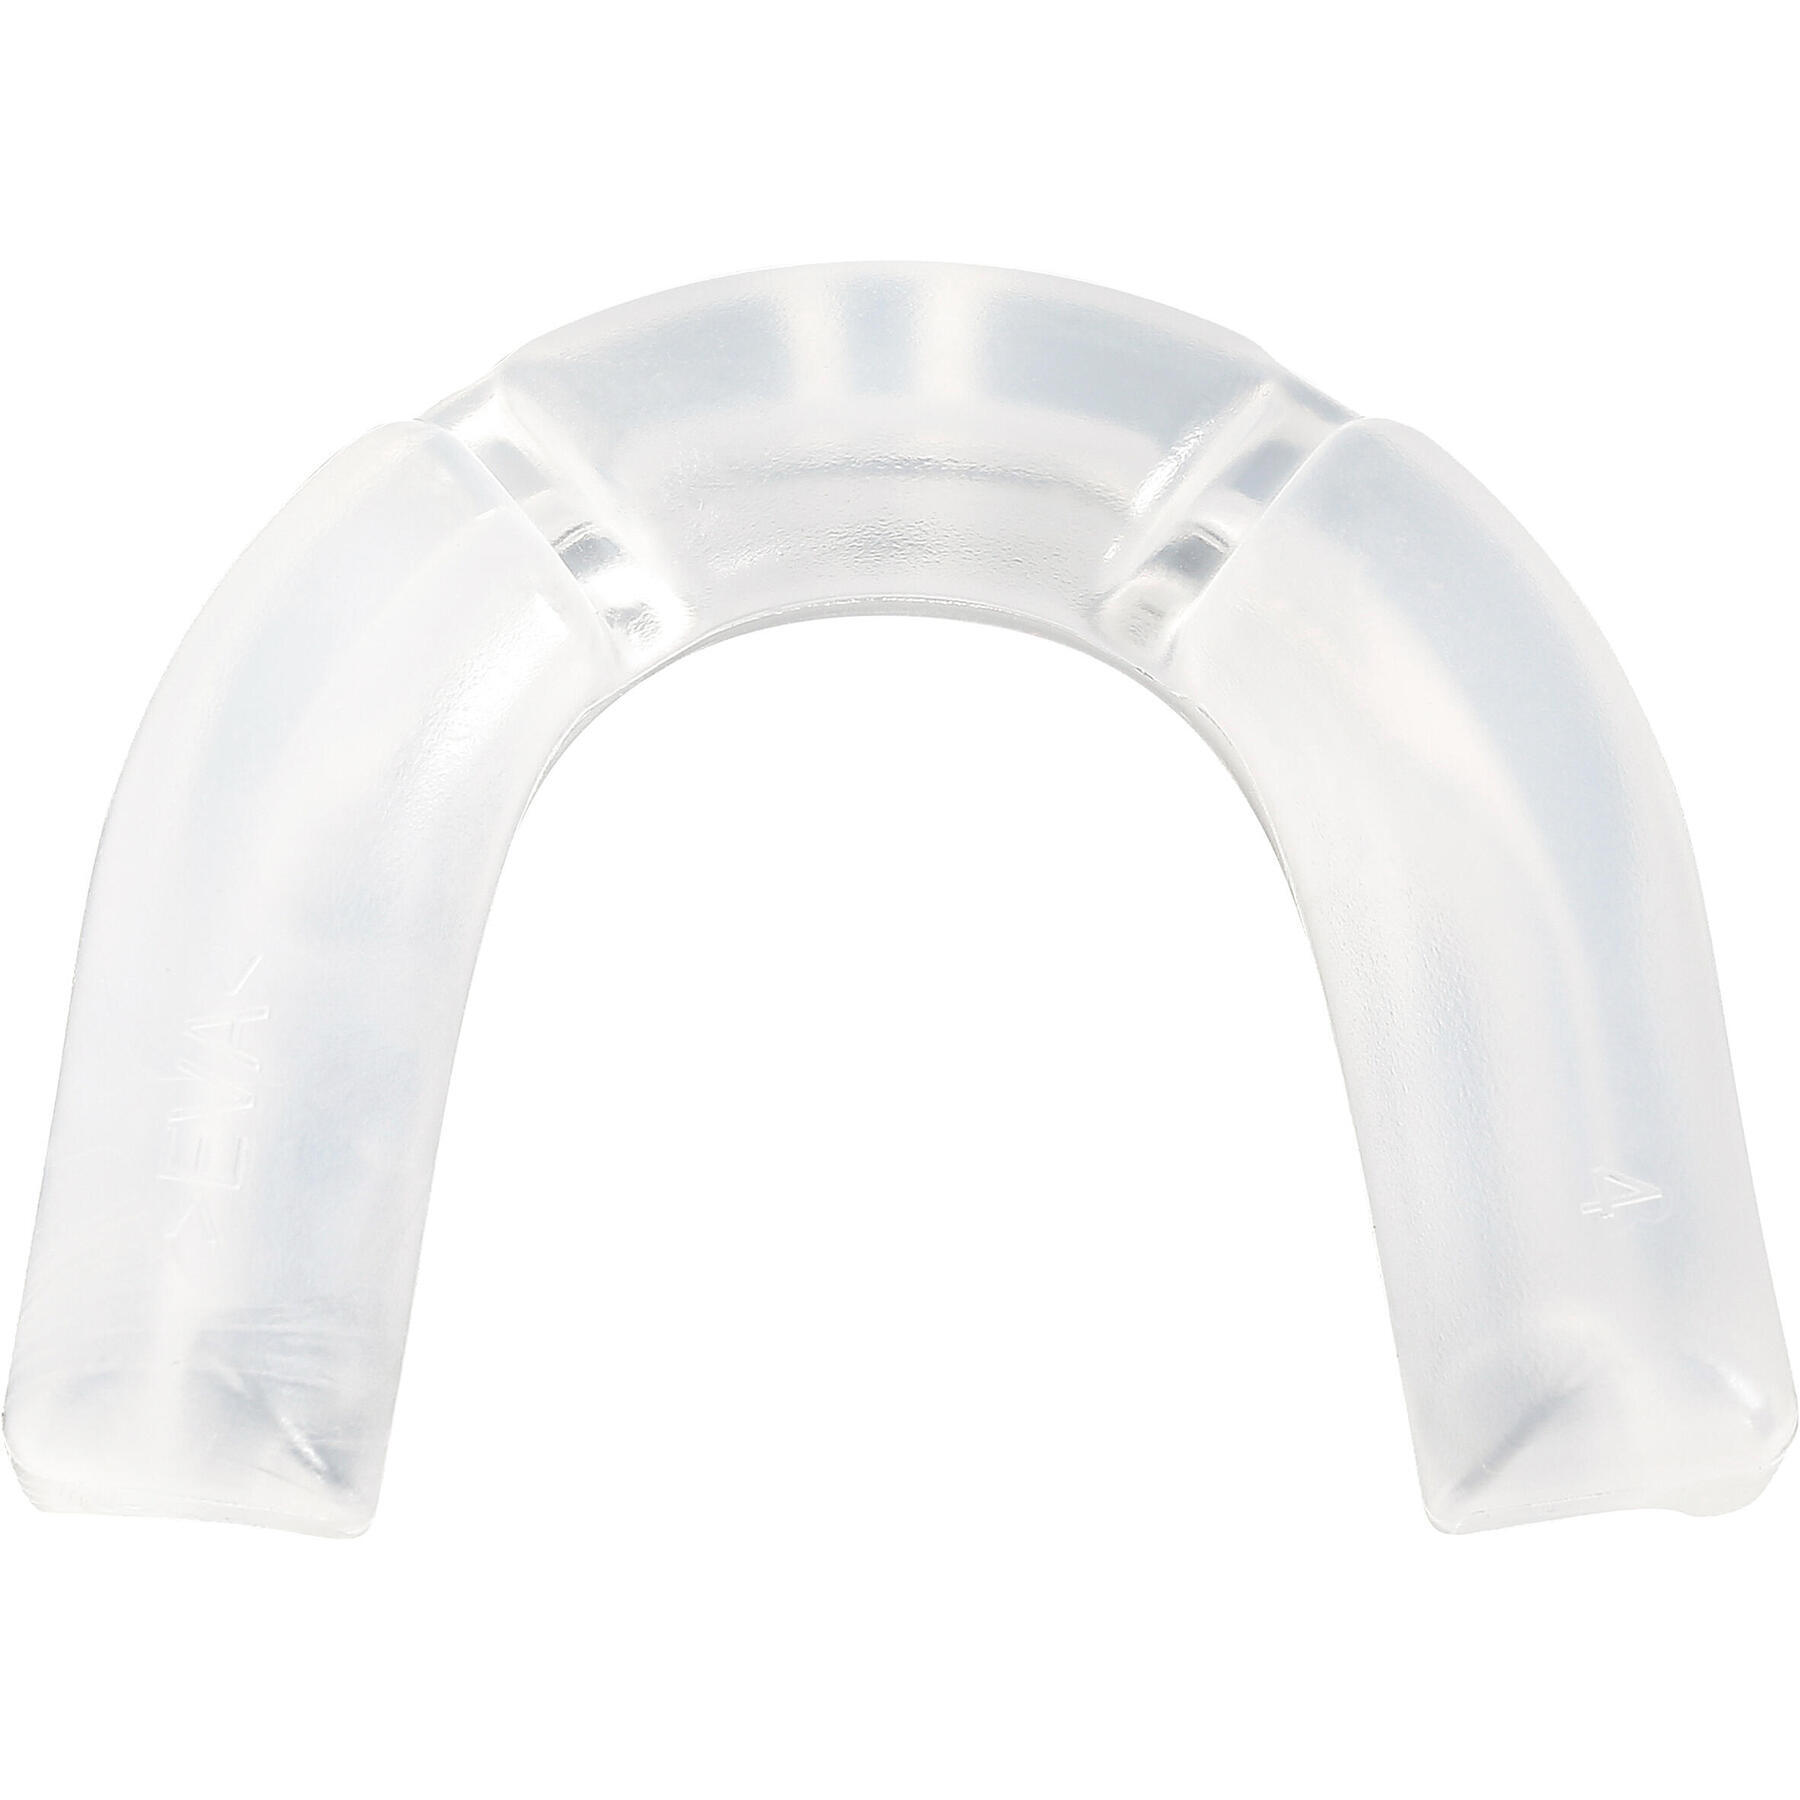 Refurbished Size M Transparent Rugby Mouthguard R100 - B Grade 4/7